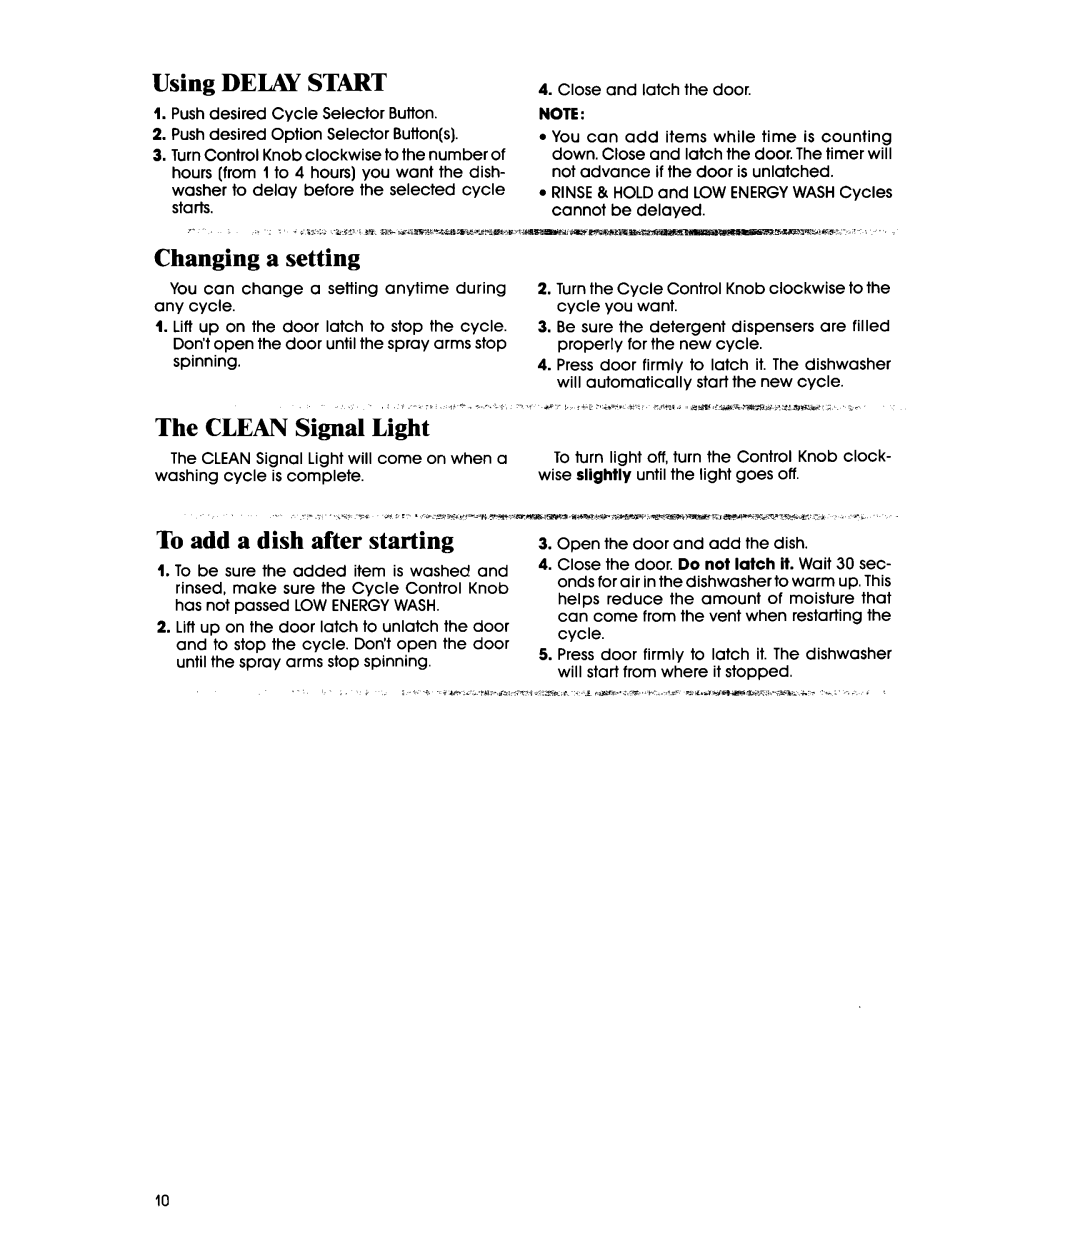 Whirlpool DP8700XT Series manual Using, Changing a setting, The CLEAN Signal Light, To add a dish after starting, Start 